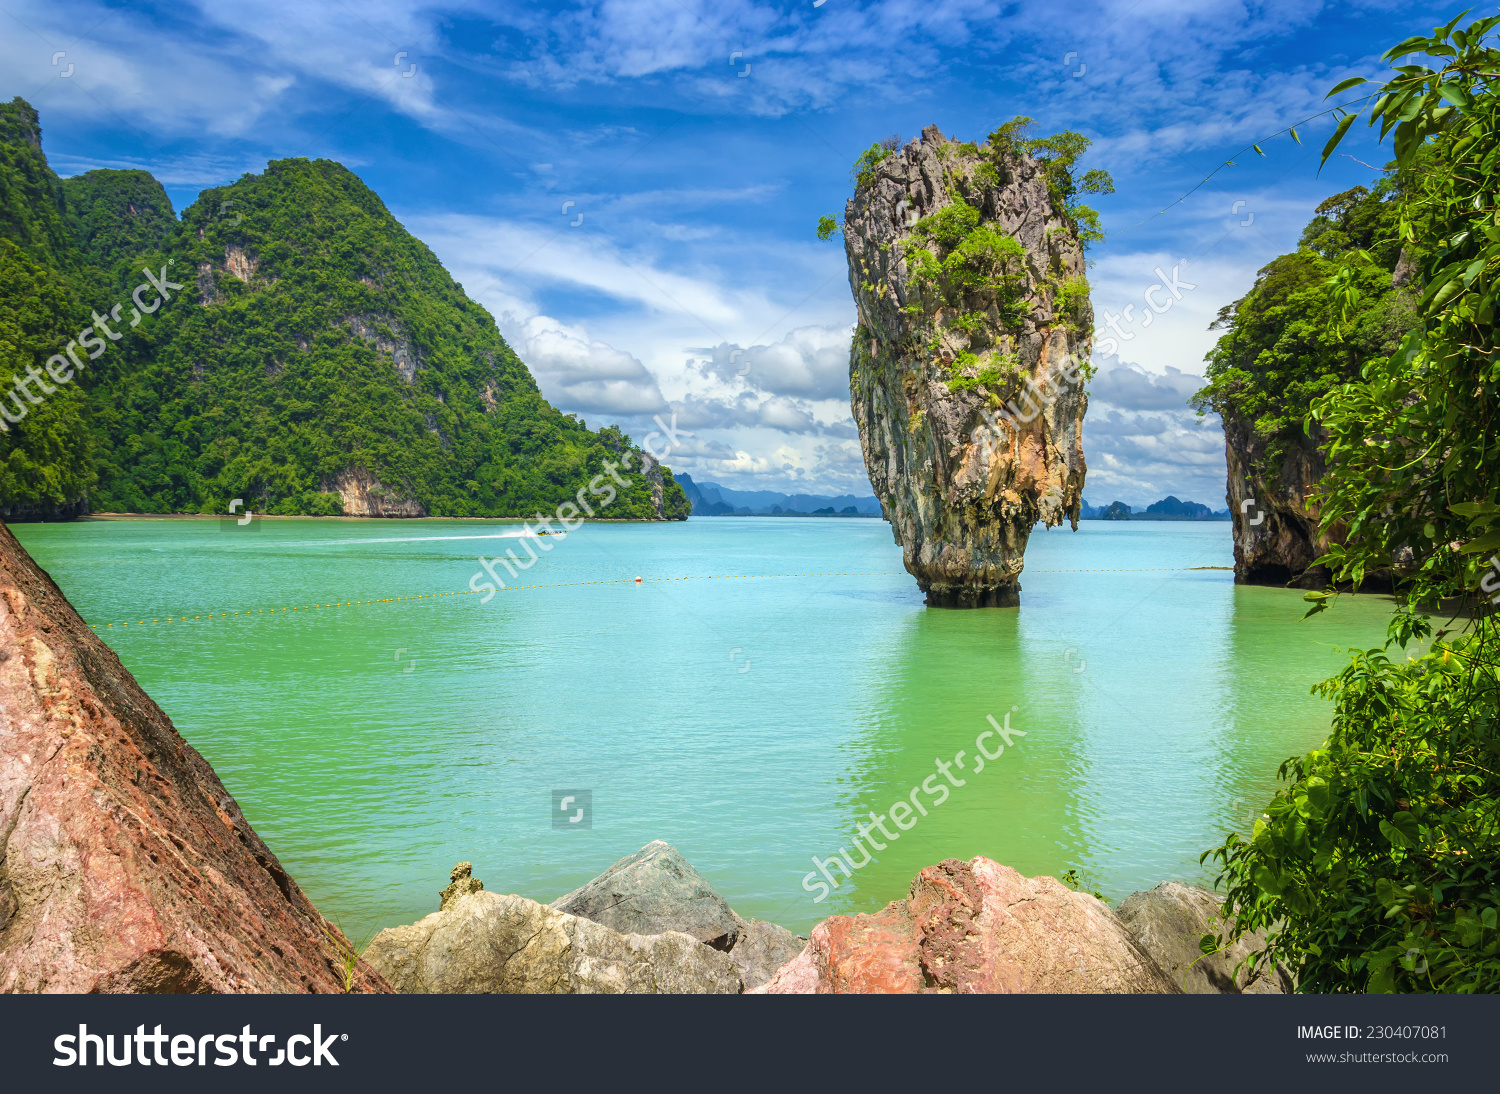 Khao Phing Kan clipart #2, Download drawings